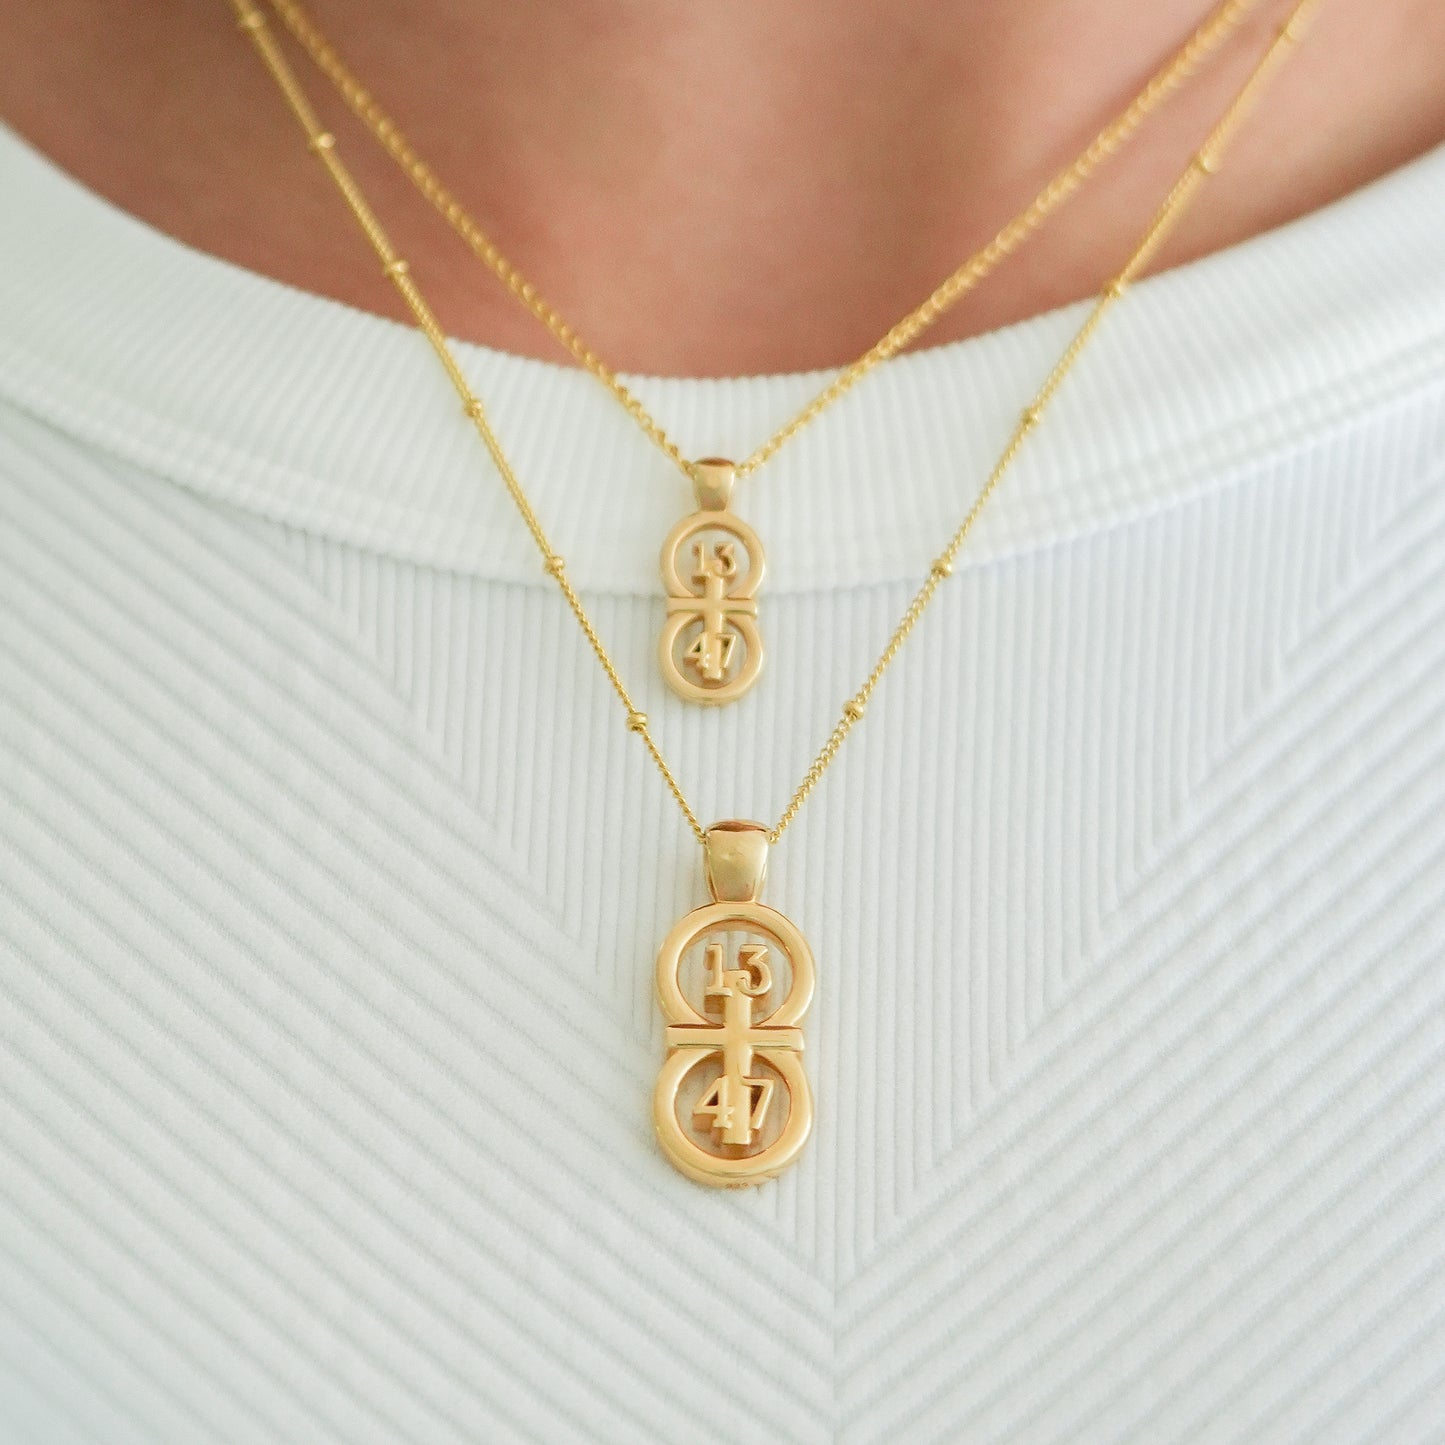 Gold small and large pendants displayed on neck with this wheat chain and satellite chain on the larger pendant.  The RIYAN 29 and 11® pendant has the numbers 13, 4, and 4 intertwined with the cross to represent 1 Corinthians 13:4-7 with the chapter word "1 Corinthians" inscribed on the back.